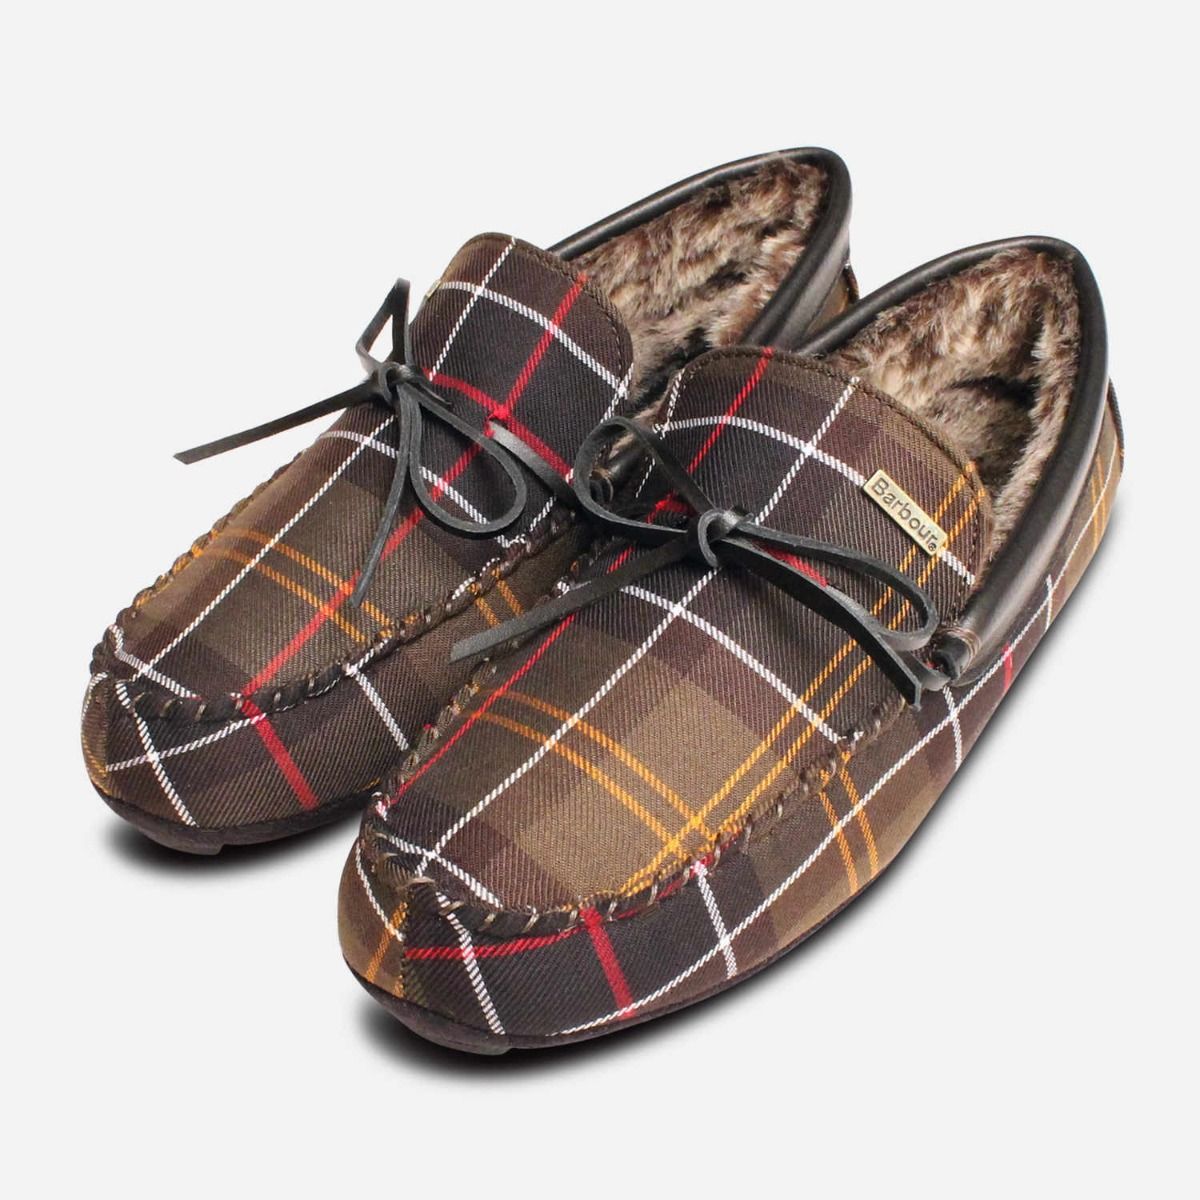 next barbour slippers